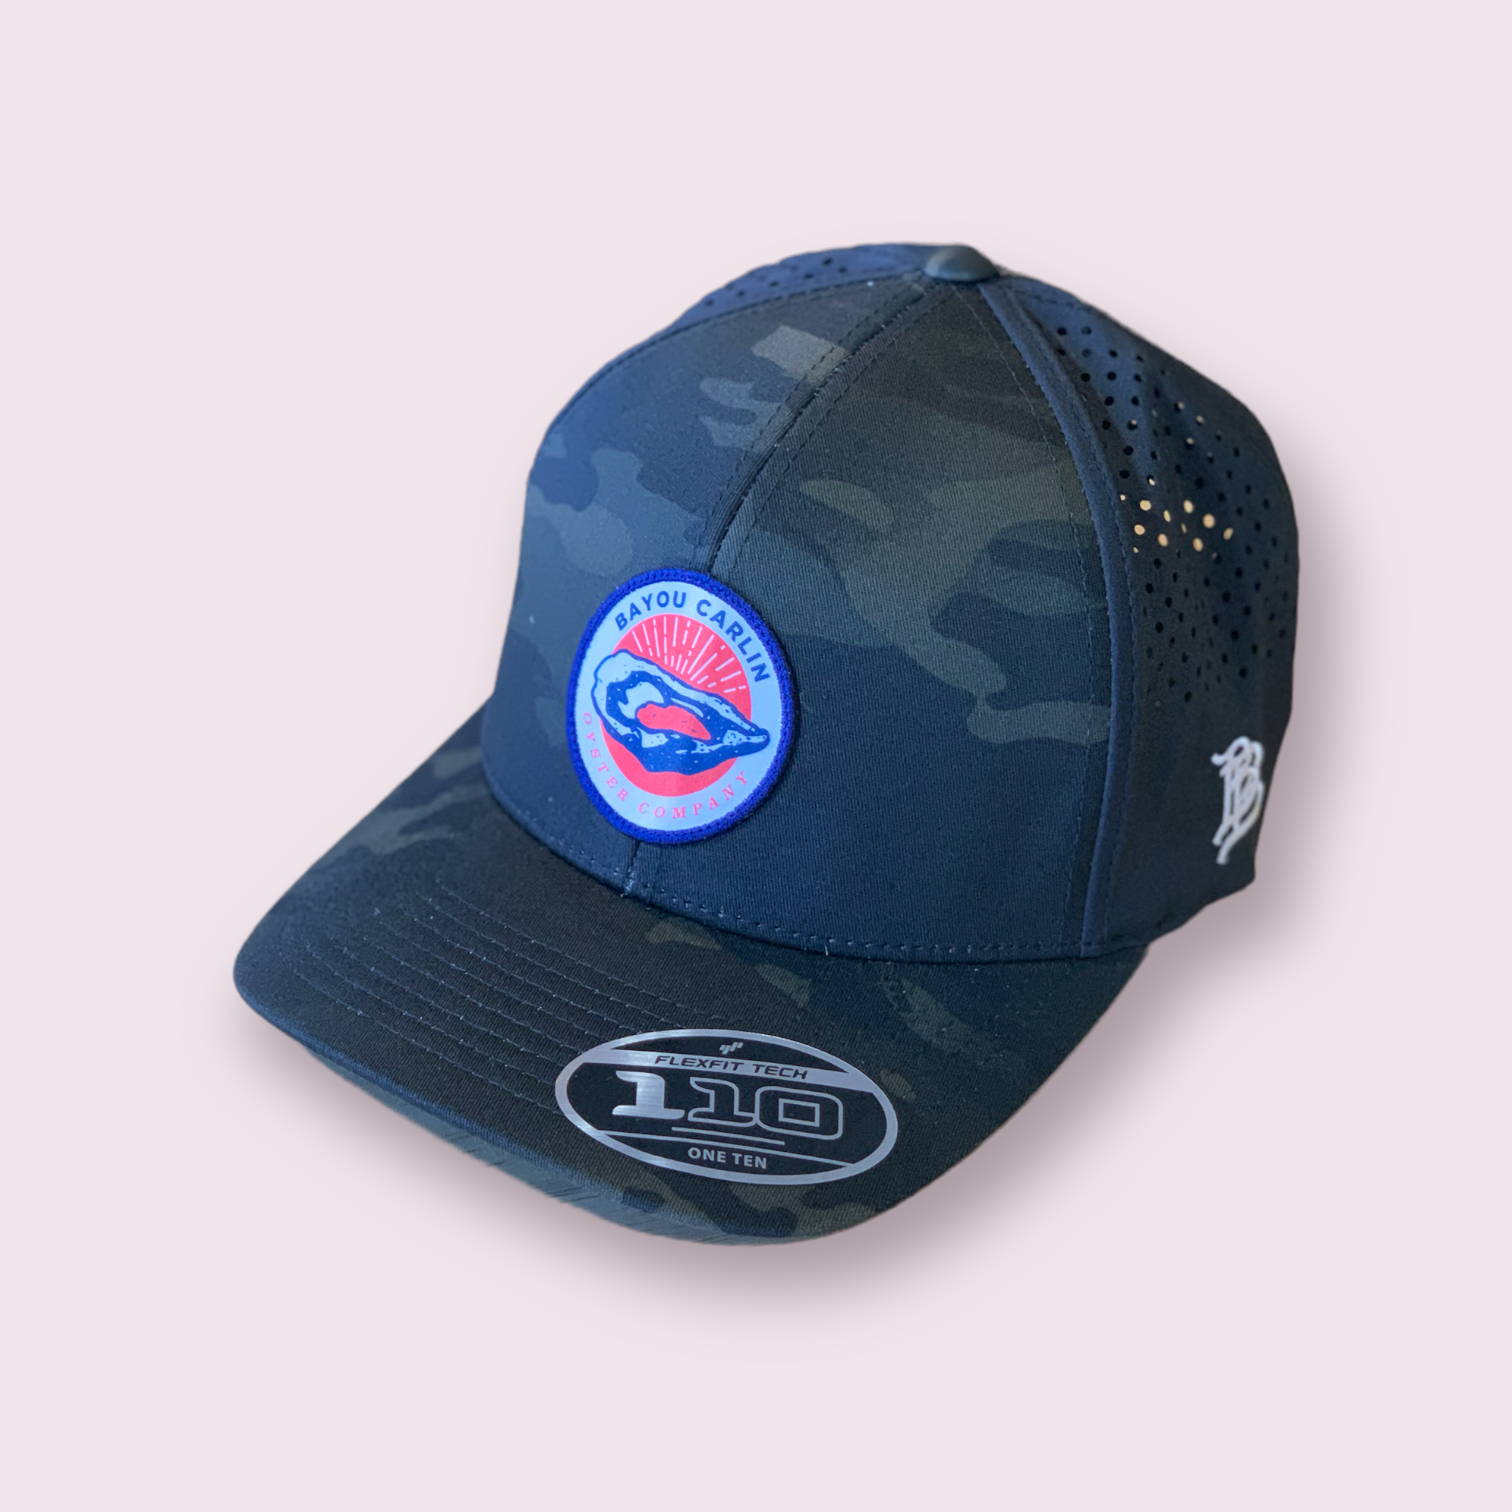 Curved Performance Trucker Hat - Sublimated Logo Patch - Black MultiCa –  Bayou Carlin Oyster